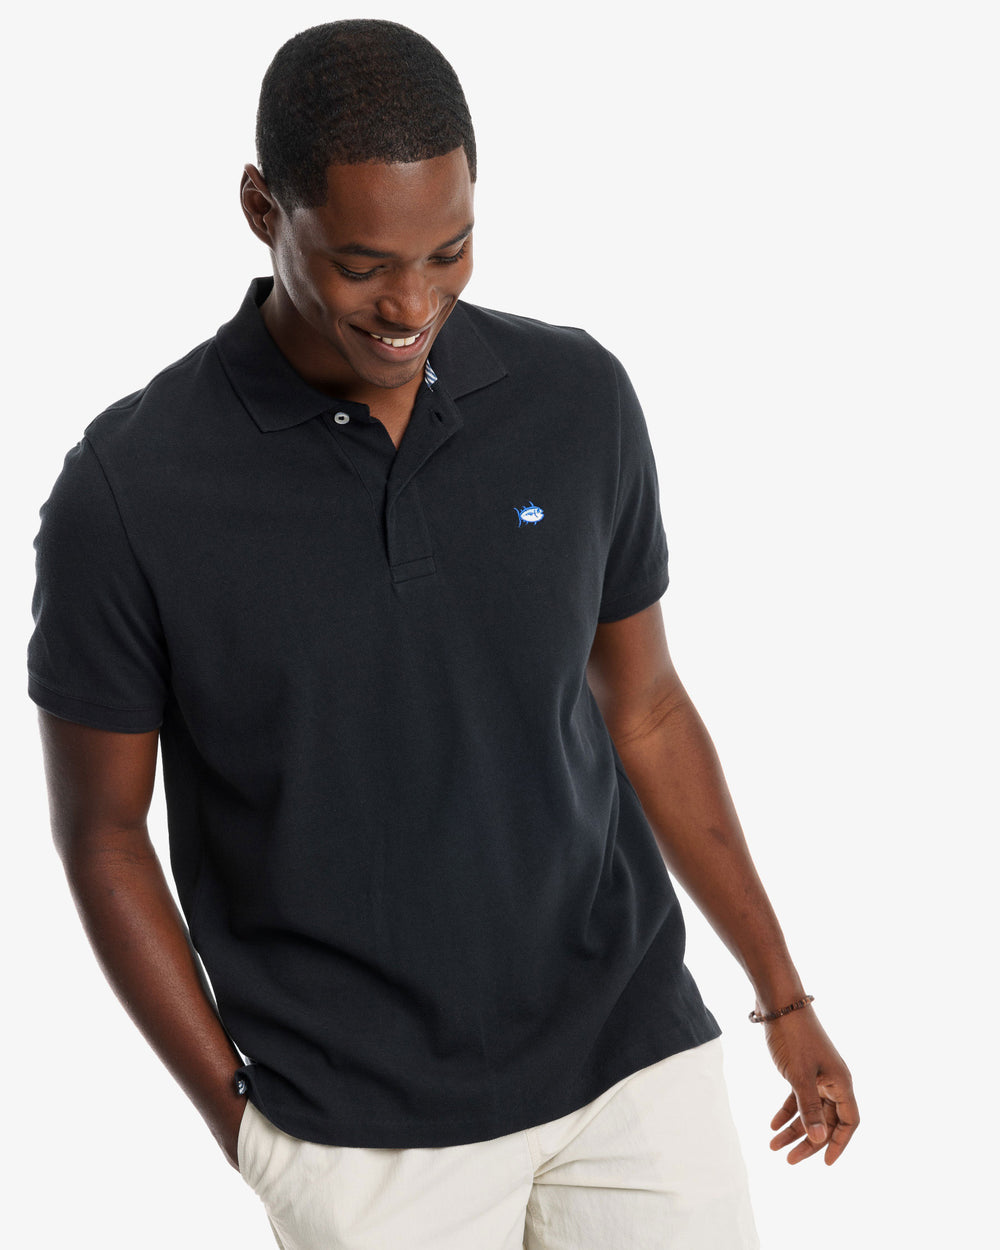 The model front view of the Men's New Skipjack Polo Shirt by Southern Tide - Midnight Black